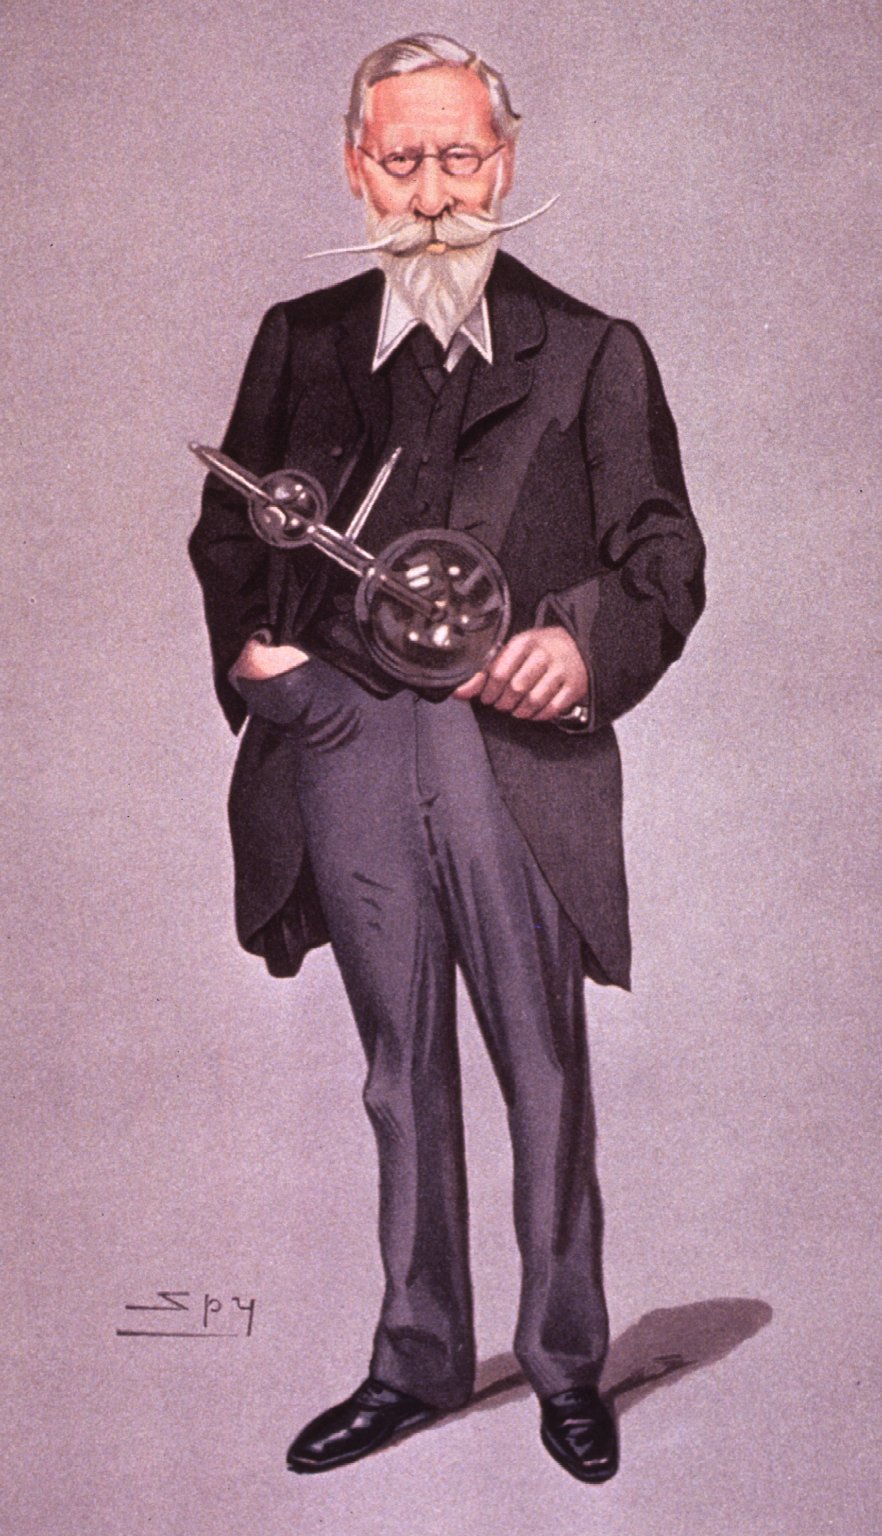 Caricature of Sir William Crookes by "Spy" (Leslie Matthew Ward).